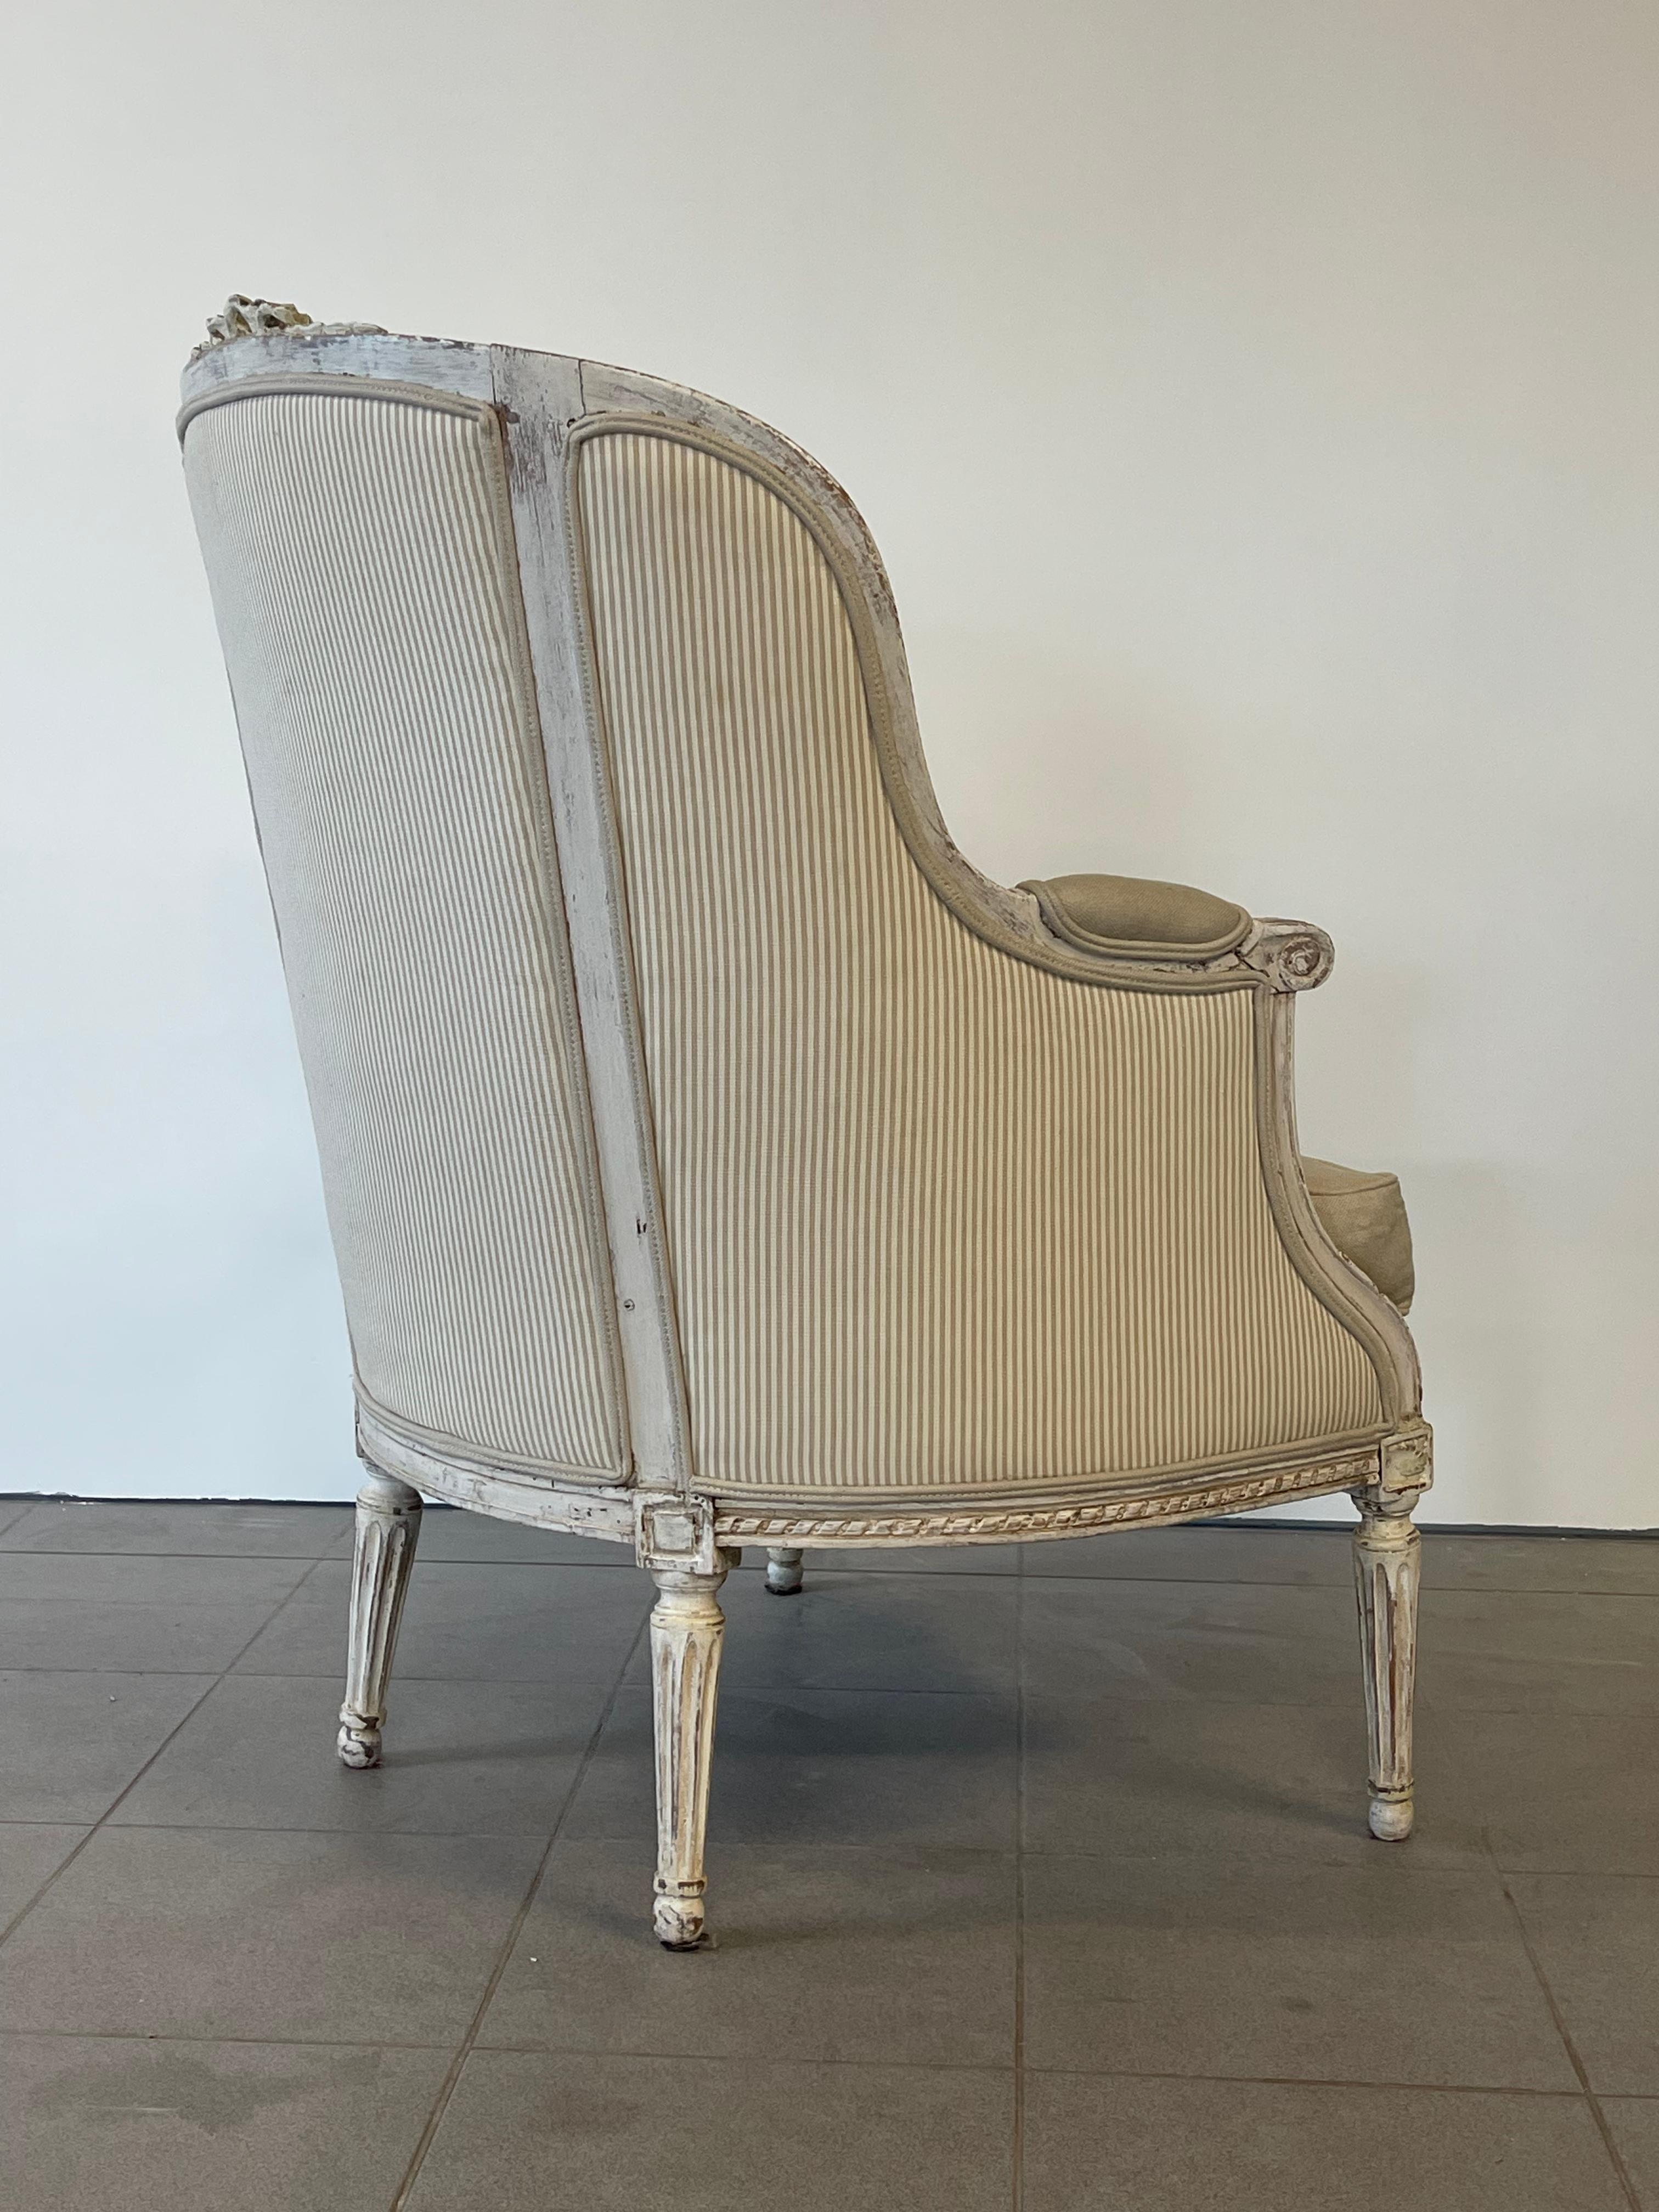 Linen French Louis XVI Style Upholstered Bergère Chair, 19th Century For Sale